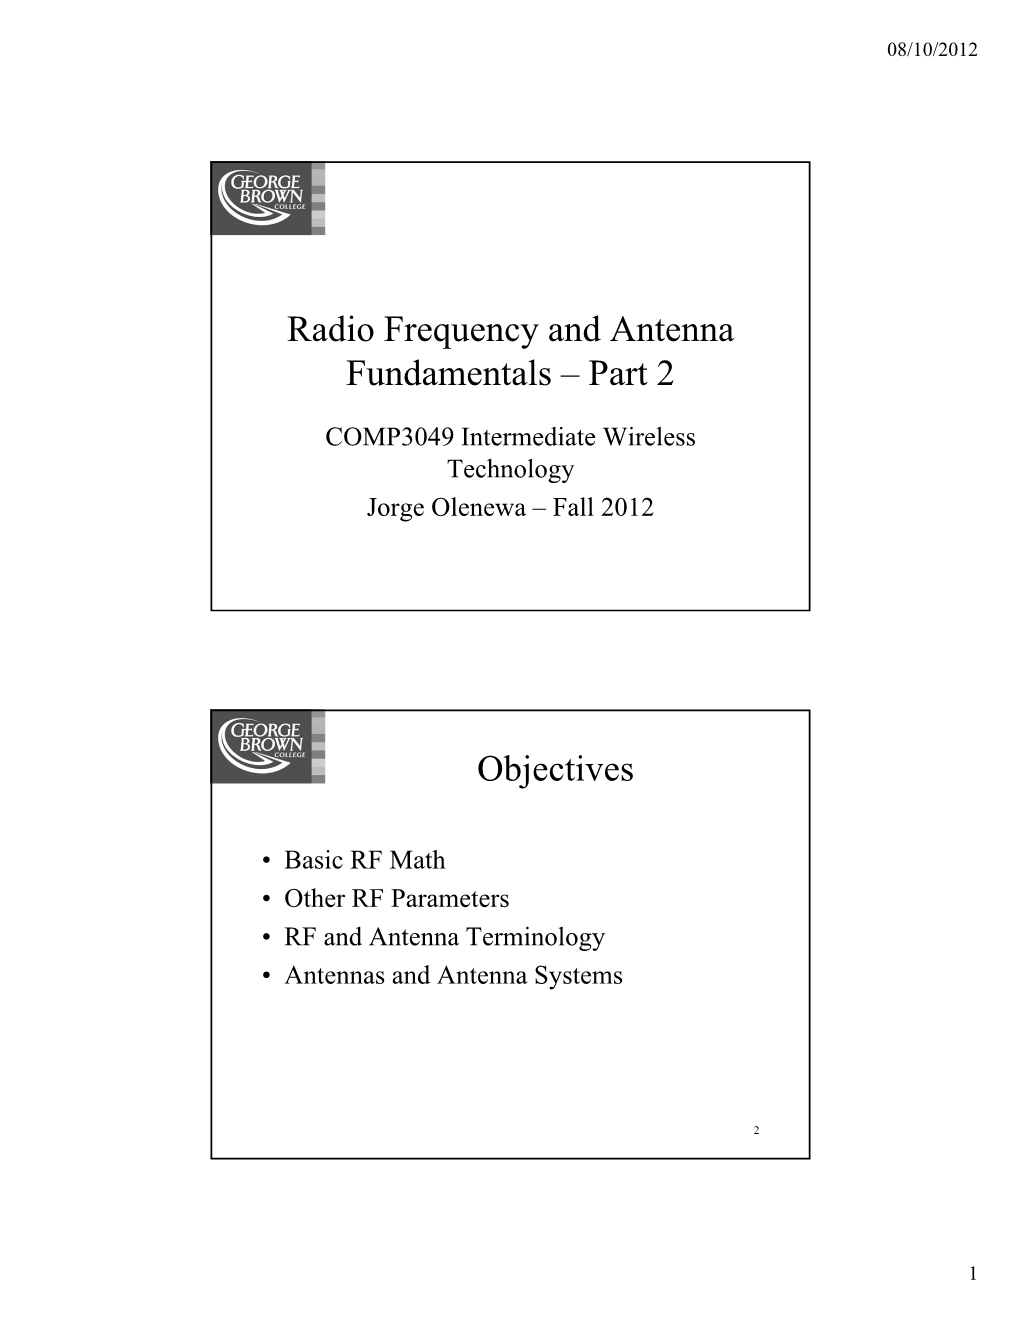 Radio Frequency and Antenna Fundamentals – Part 2